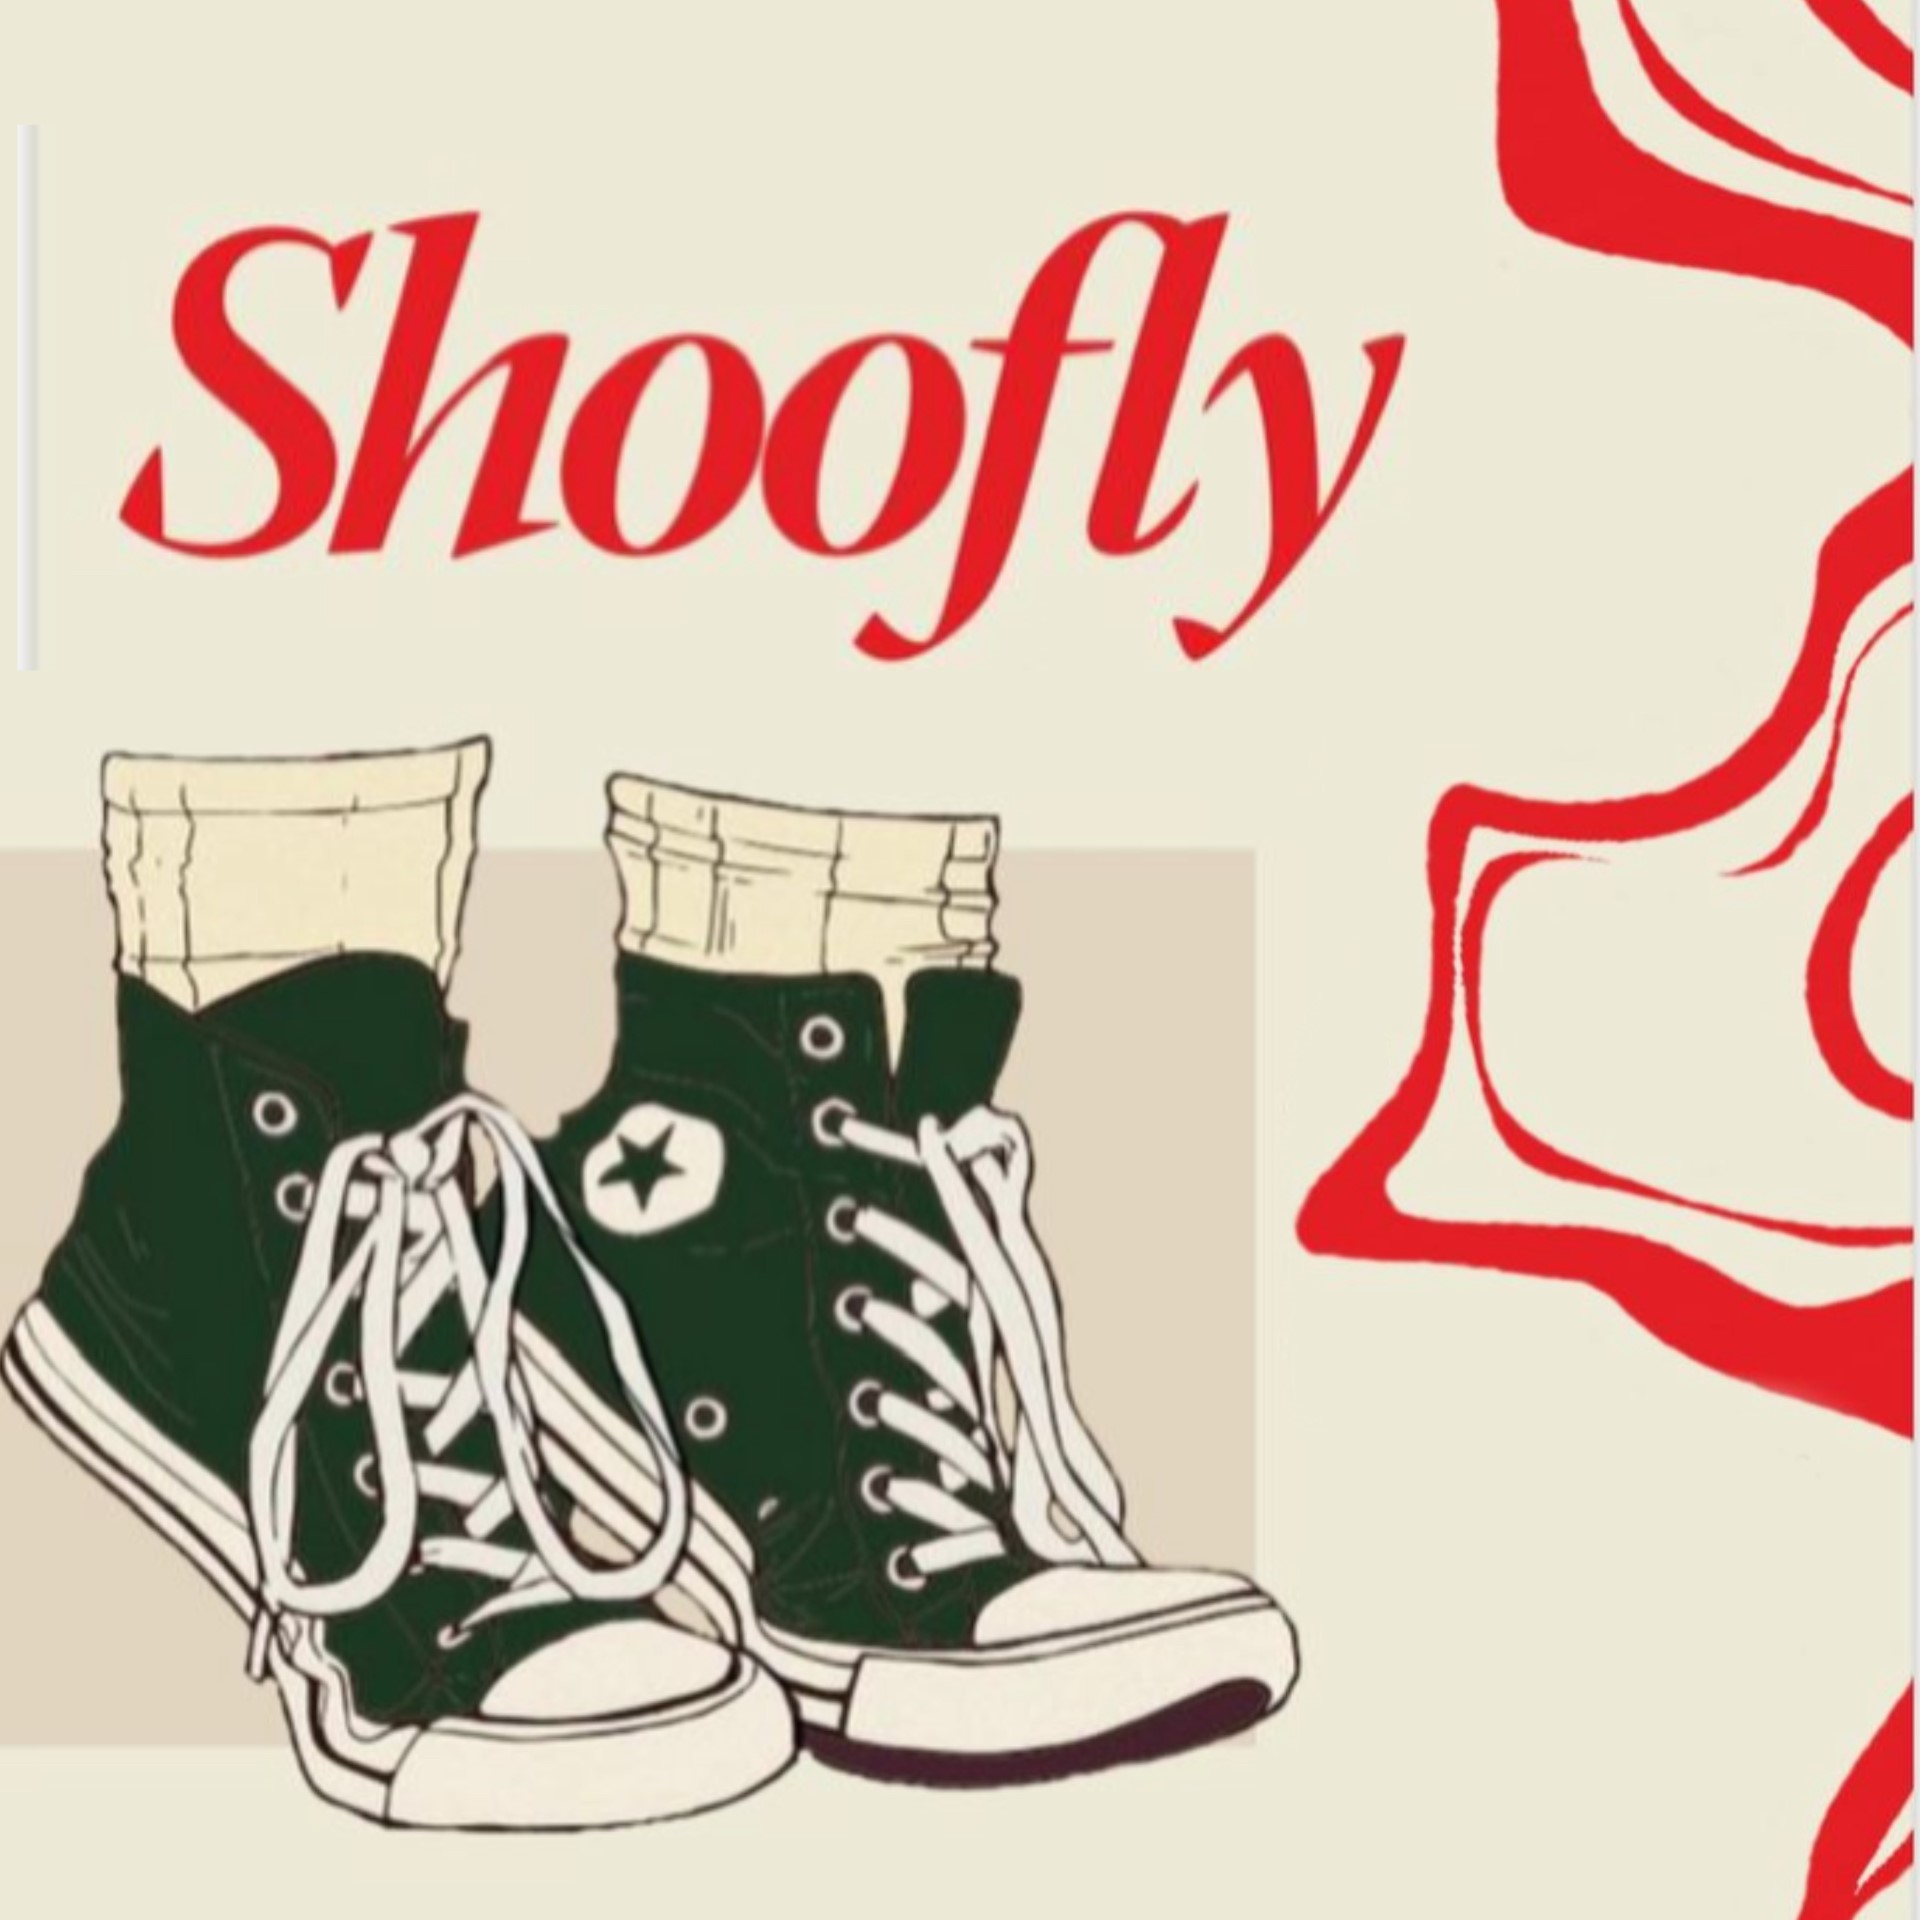 Shoofly to hold Halloween-themed reading